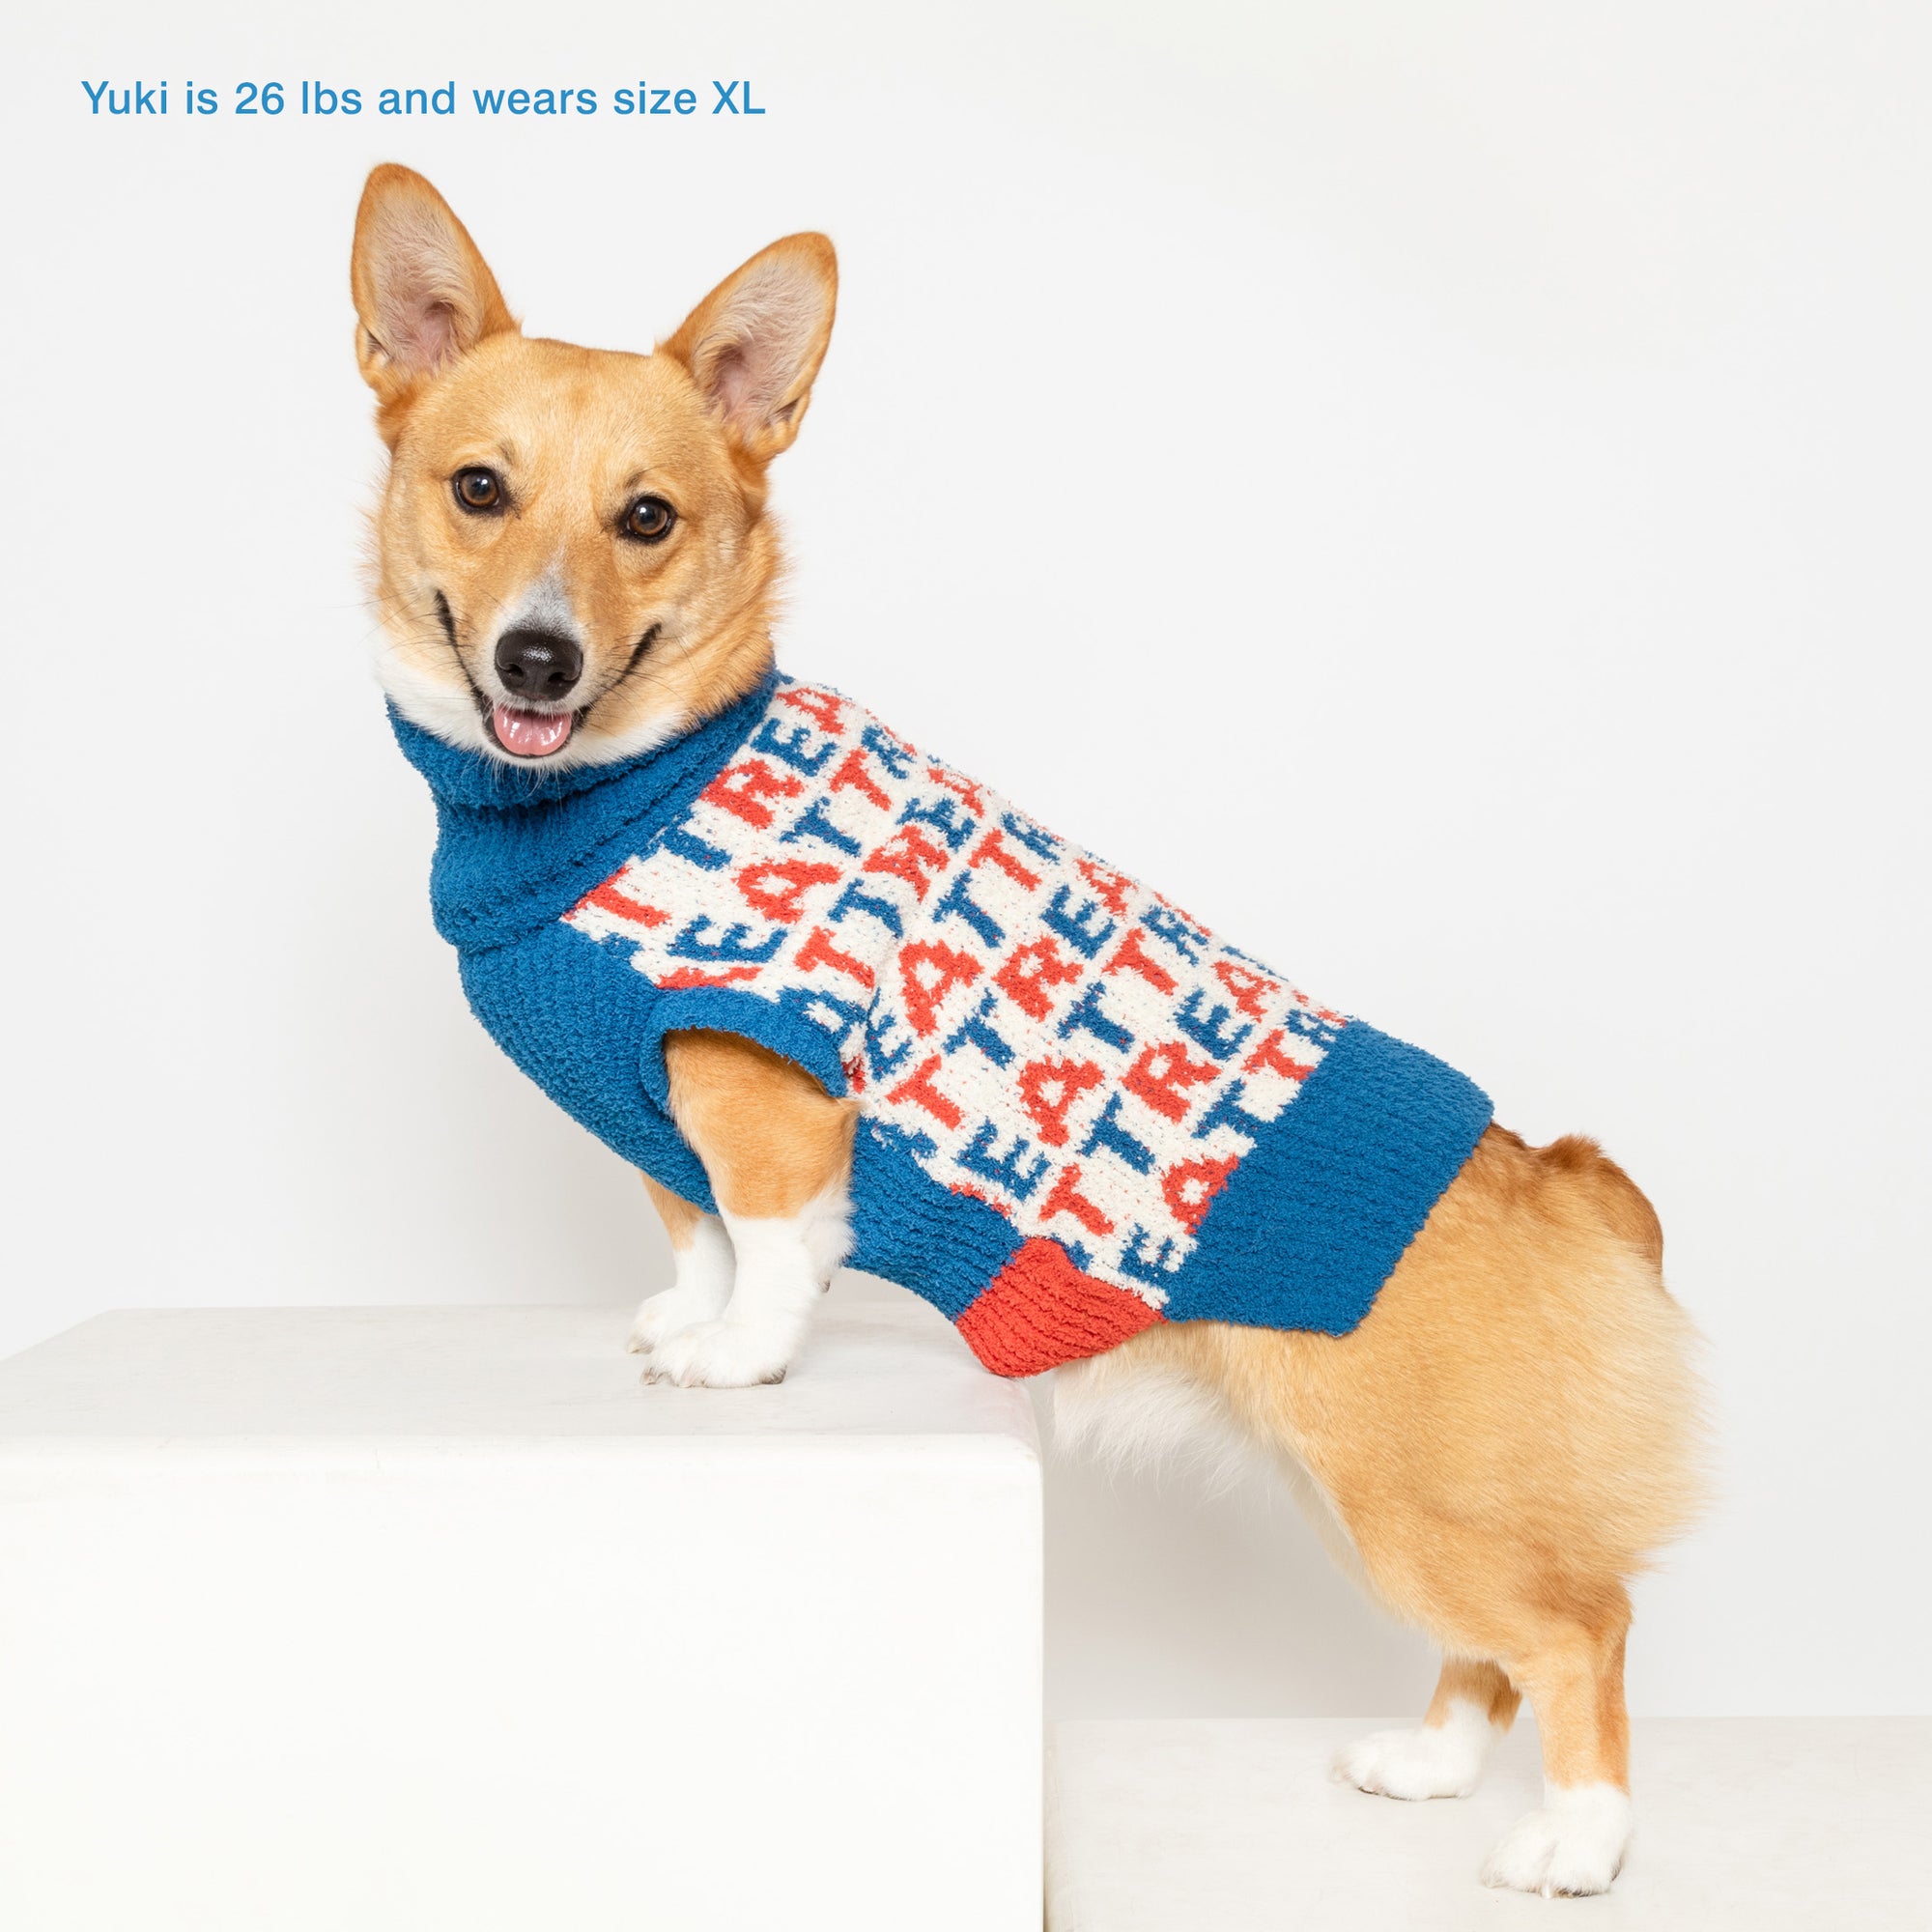 Yuki, a 26-pound Corgi with a cheerful demeanor, is showcased wearing a size XL blue turtleneck sweater adorned with a playful red and white "Treat" motif, perfectly sized to offer a snug and comfortable fit.